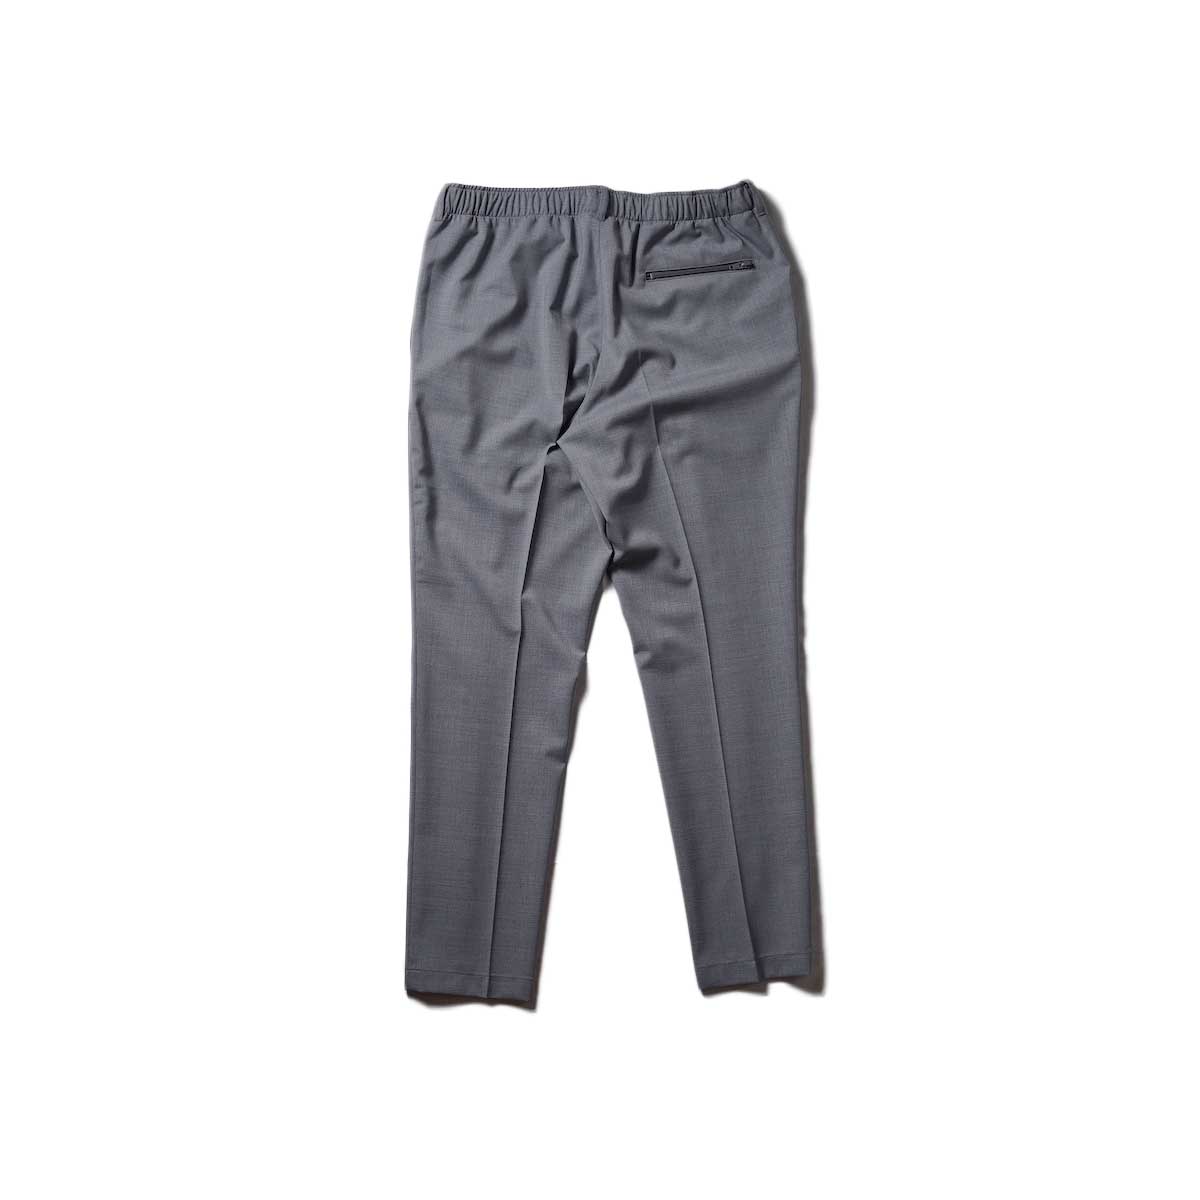 N.HOOLYWOOD / CP07-010 TAPERED EASY PANTS (Gray)背面